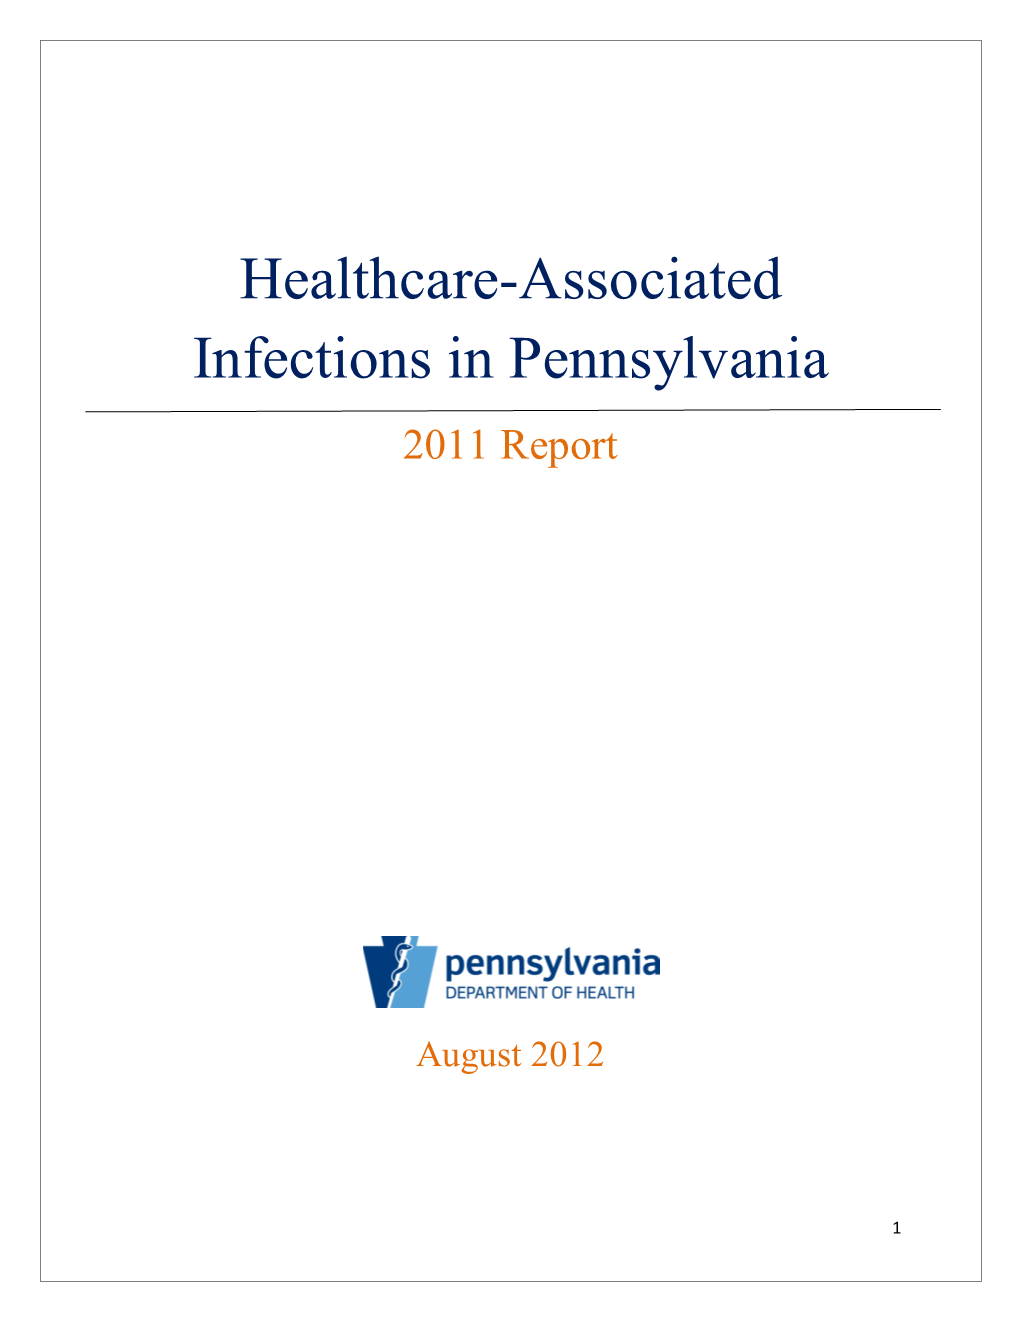 Healthcare-Associated Infections in Pennsylvania 2011 Report